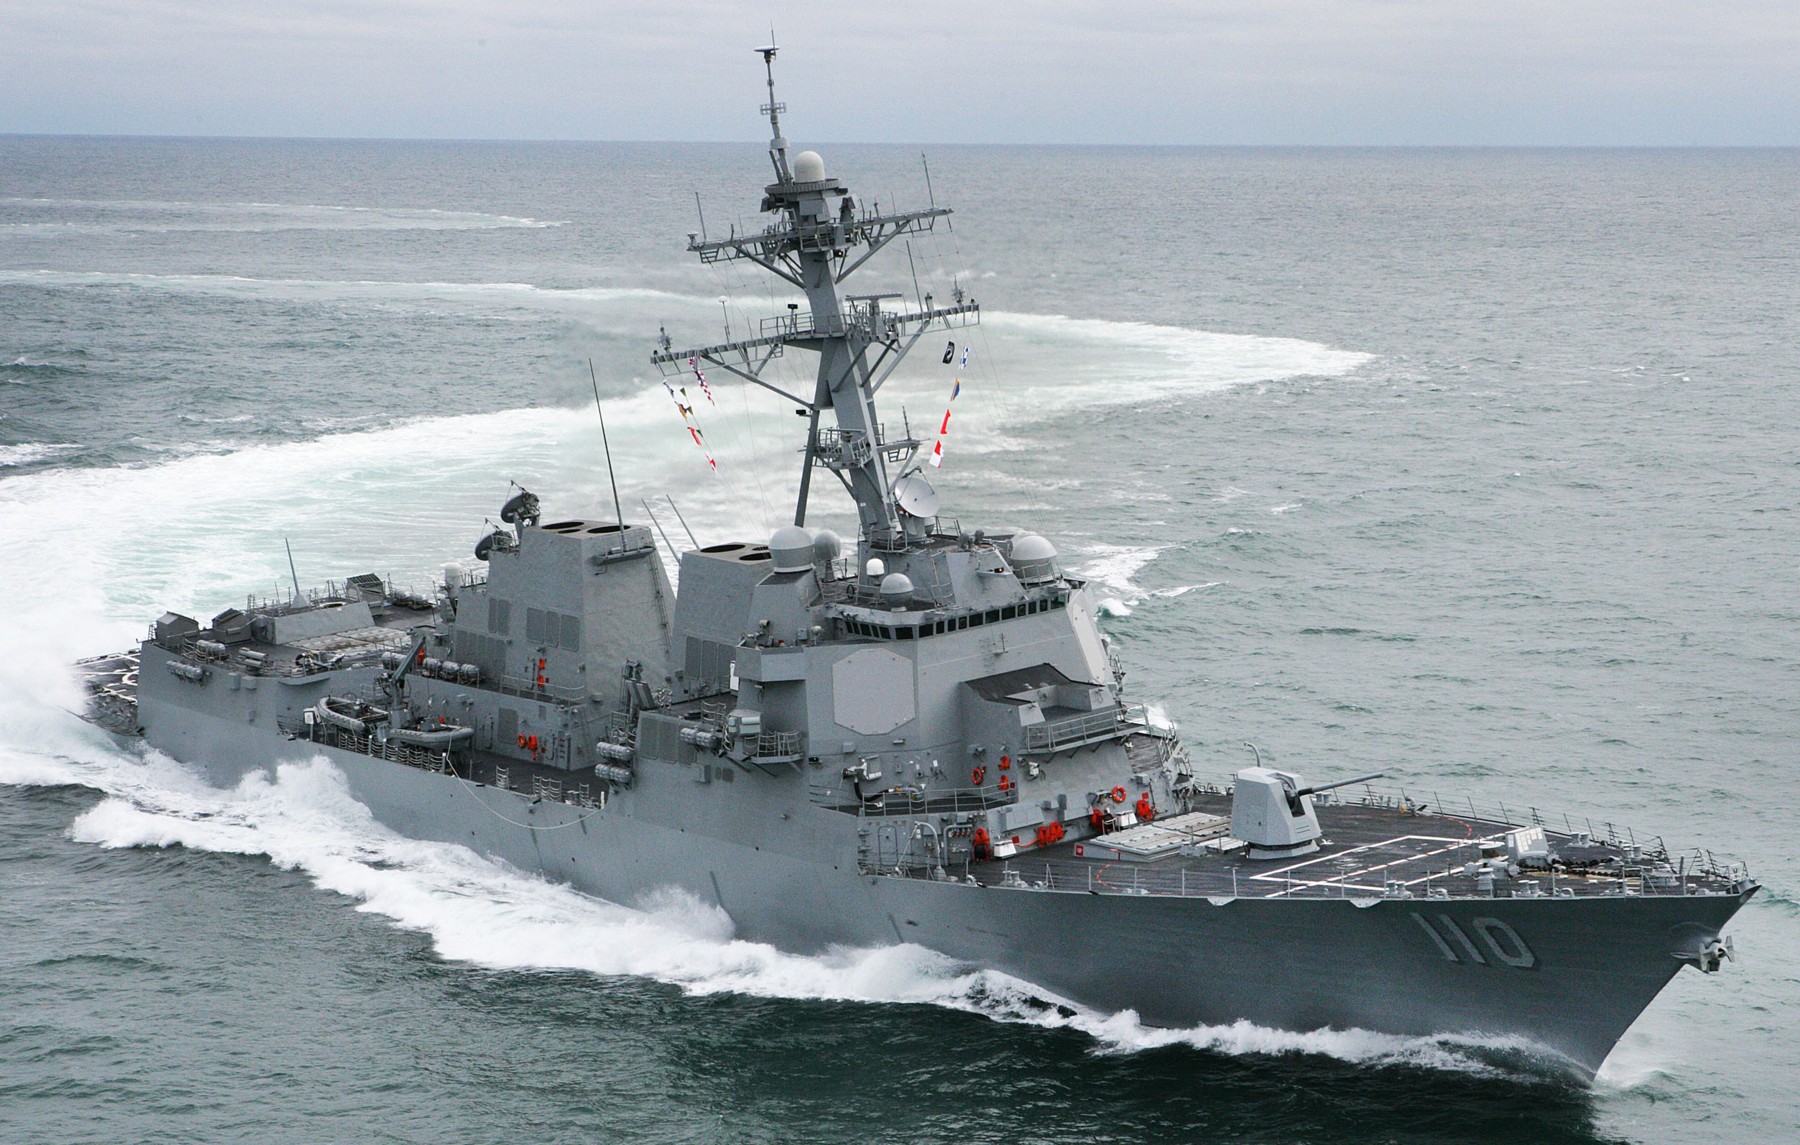 ddg-110 uss william p. lawrence arleigh burke class guided missile destroyer aegis us navy trials 44p